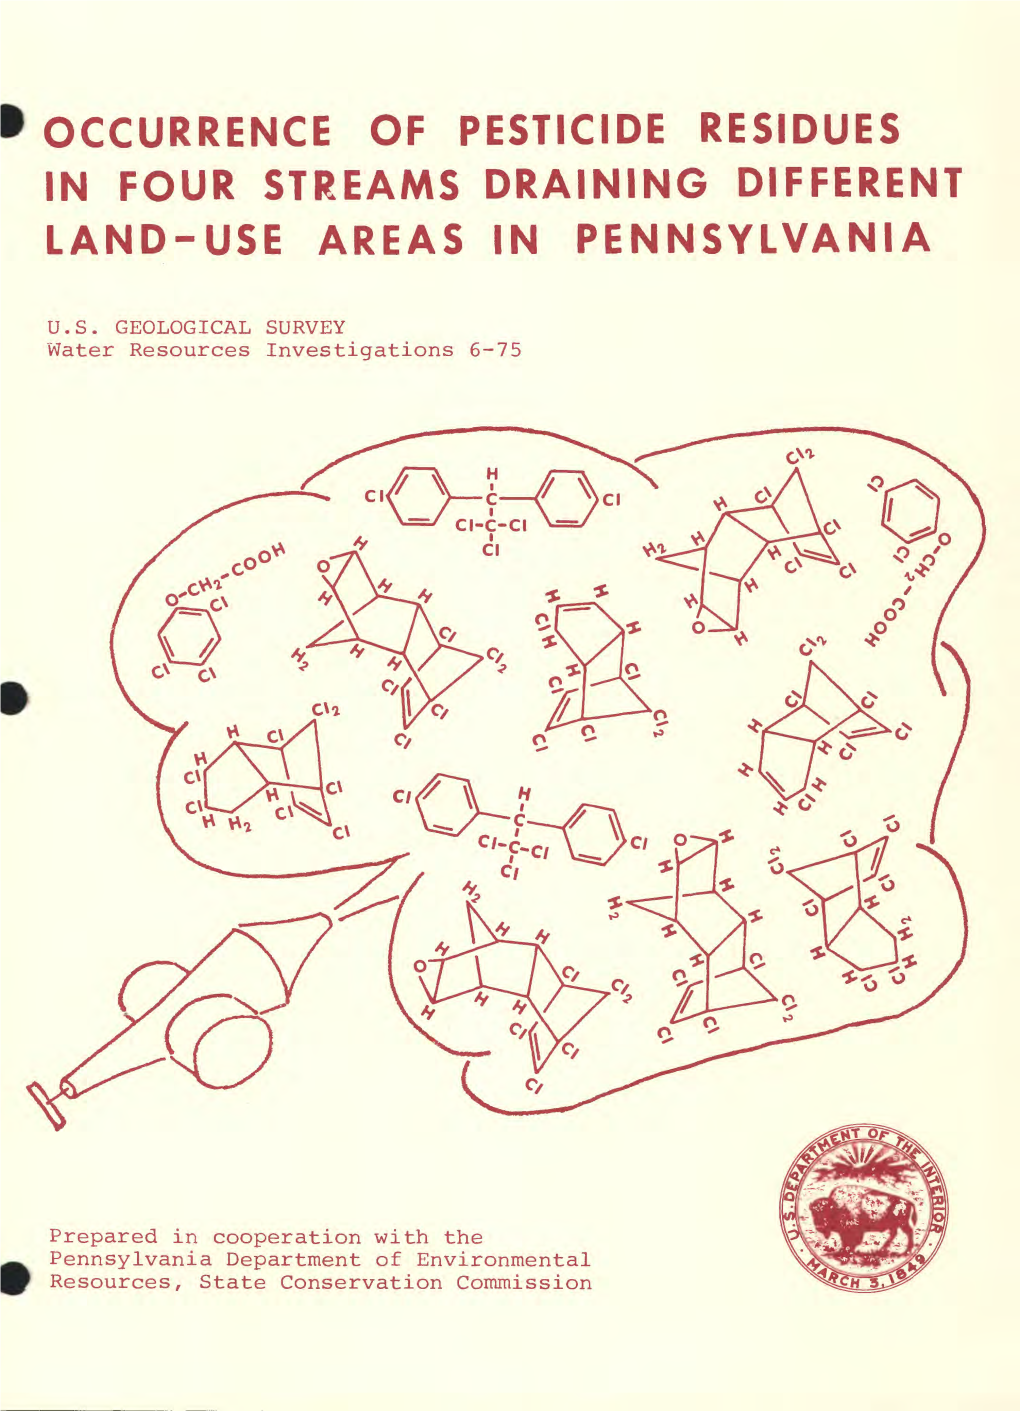 Occurrence of Pesticide Residues in Four Streams Draining Different Land-Use Areas in Pennsylvania